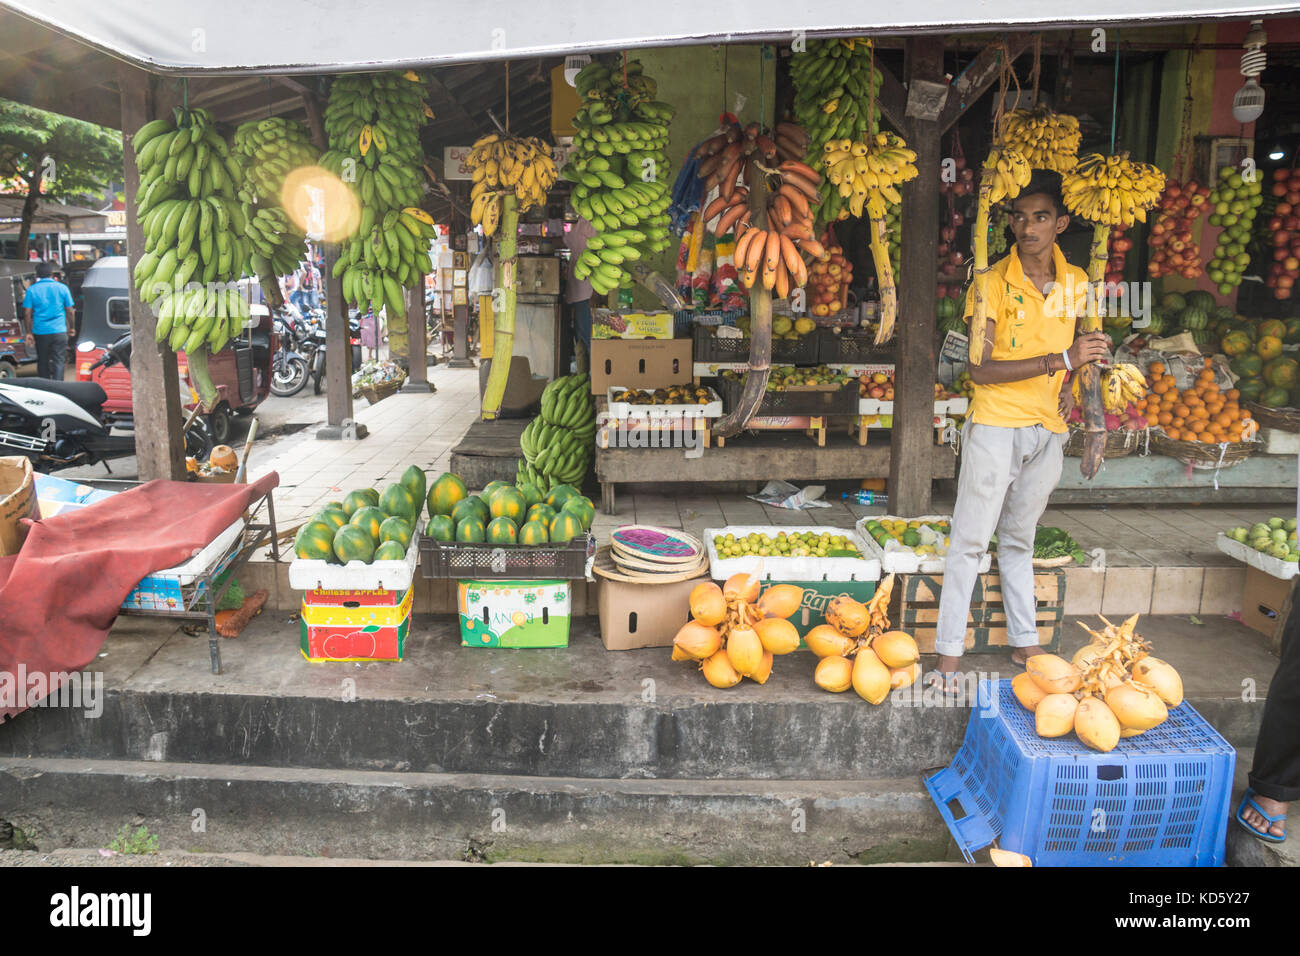 Galle, Sri Lanka - April 11 2017: Market seller standing at a stall with different types of bananas and fruits Stock Photo